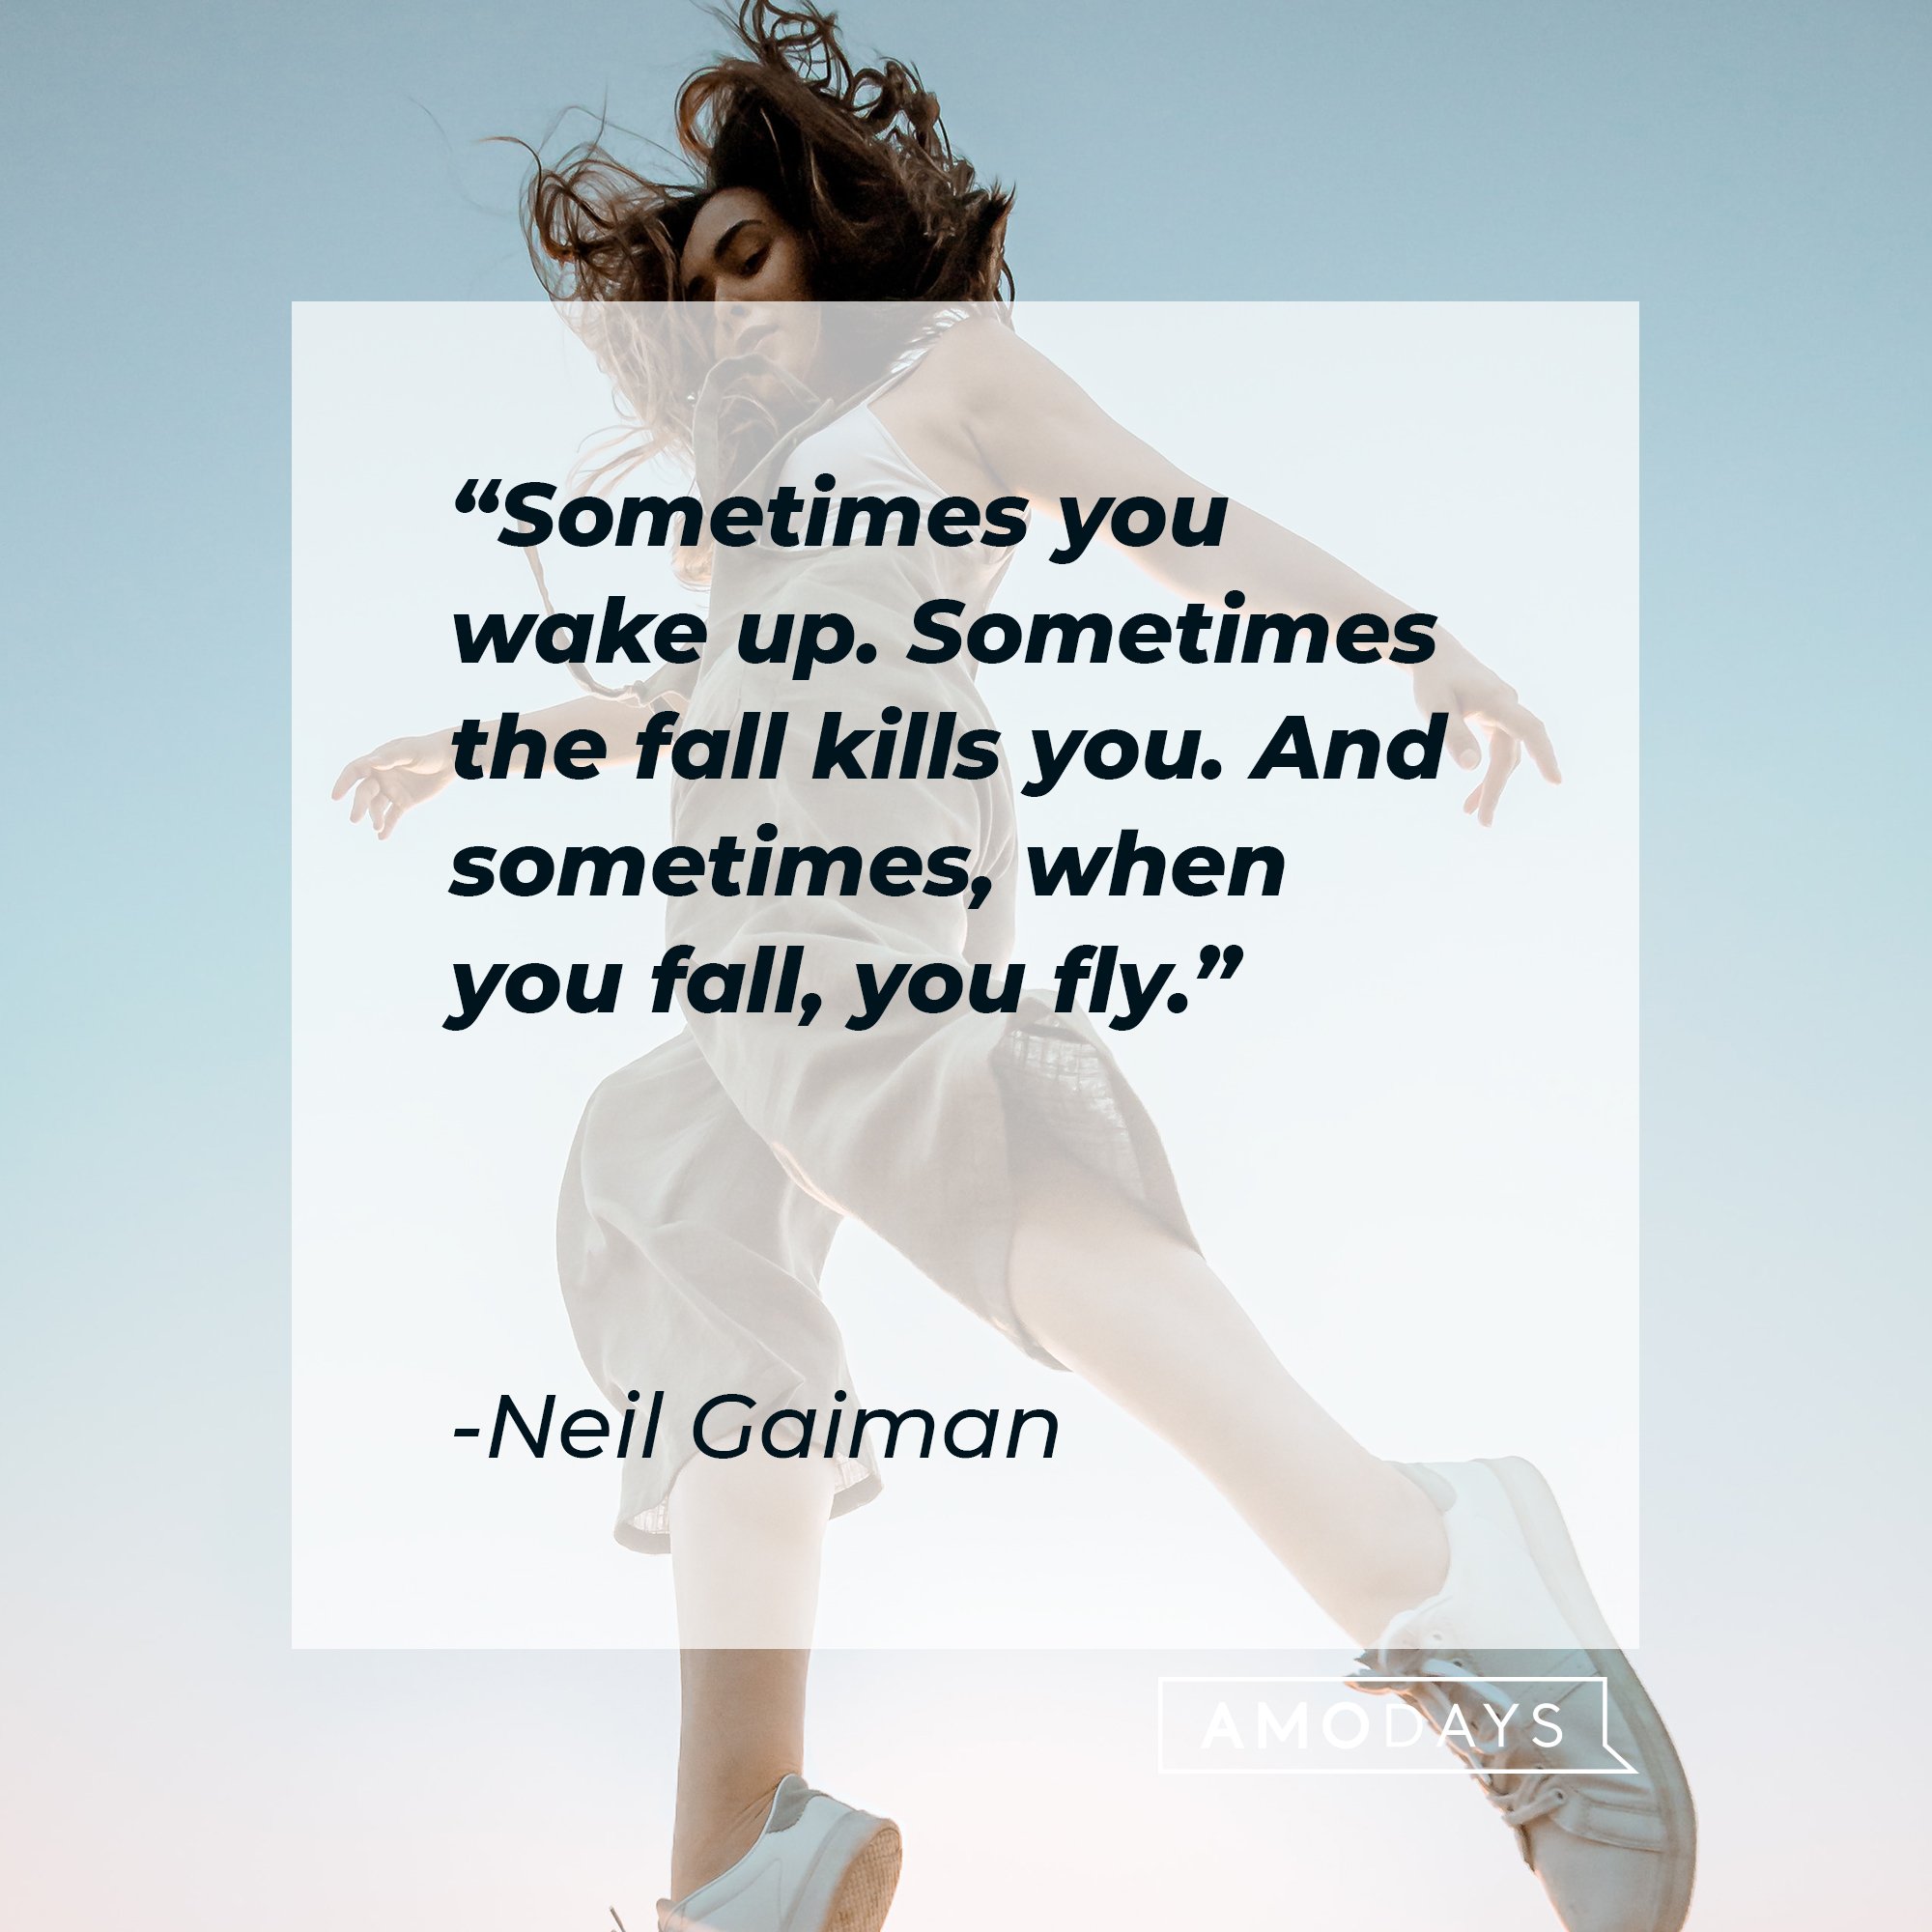 Neil Gaiman's quote: "Sometimes you wake up. Sometimes the fall kills you. And sometimes, when you fall, you fly." | Image: AmoDays